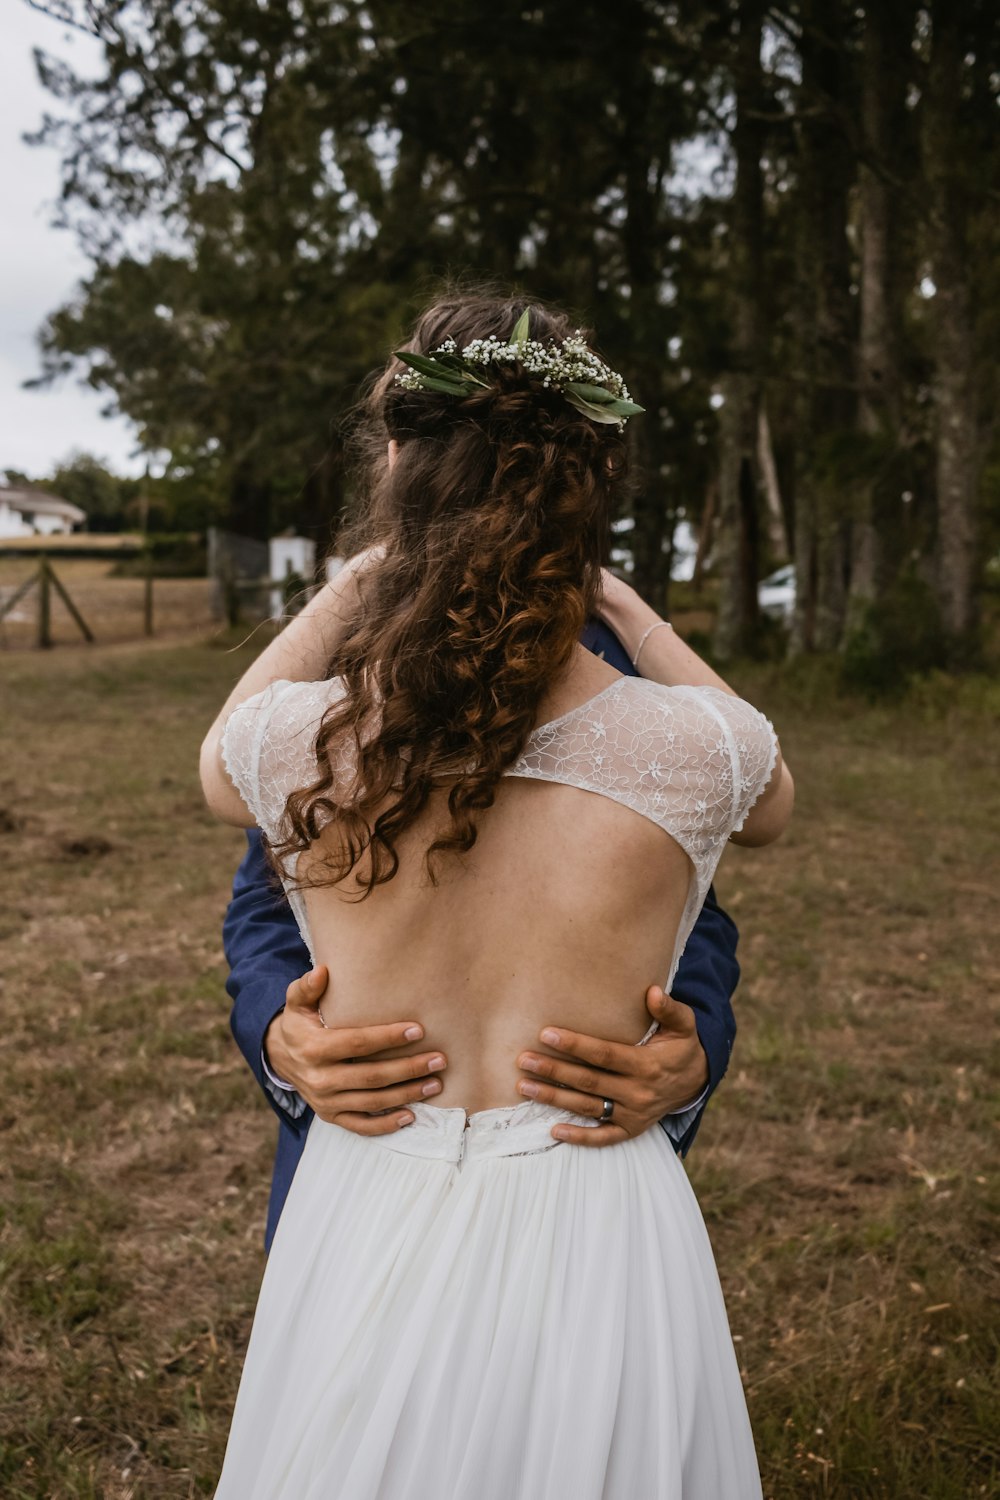 view of woman with sexy back dress